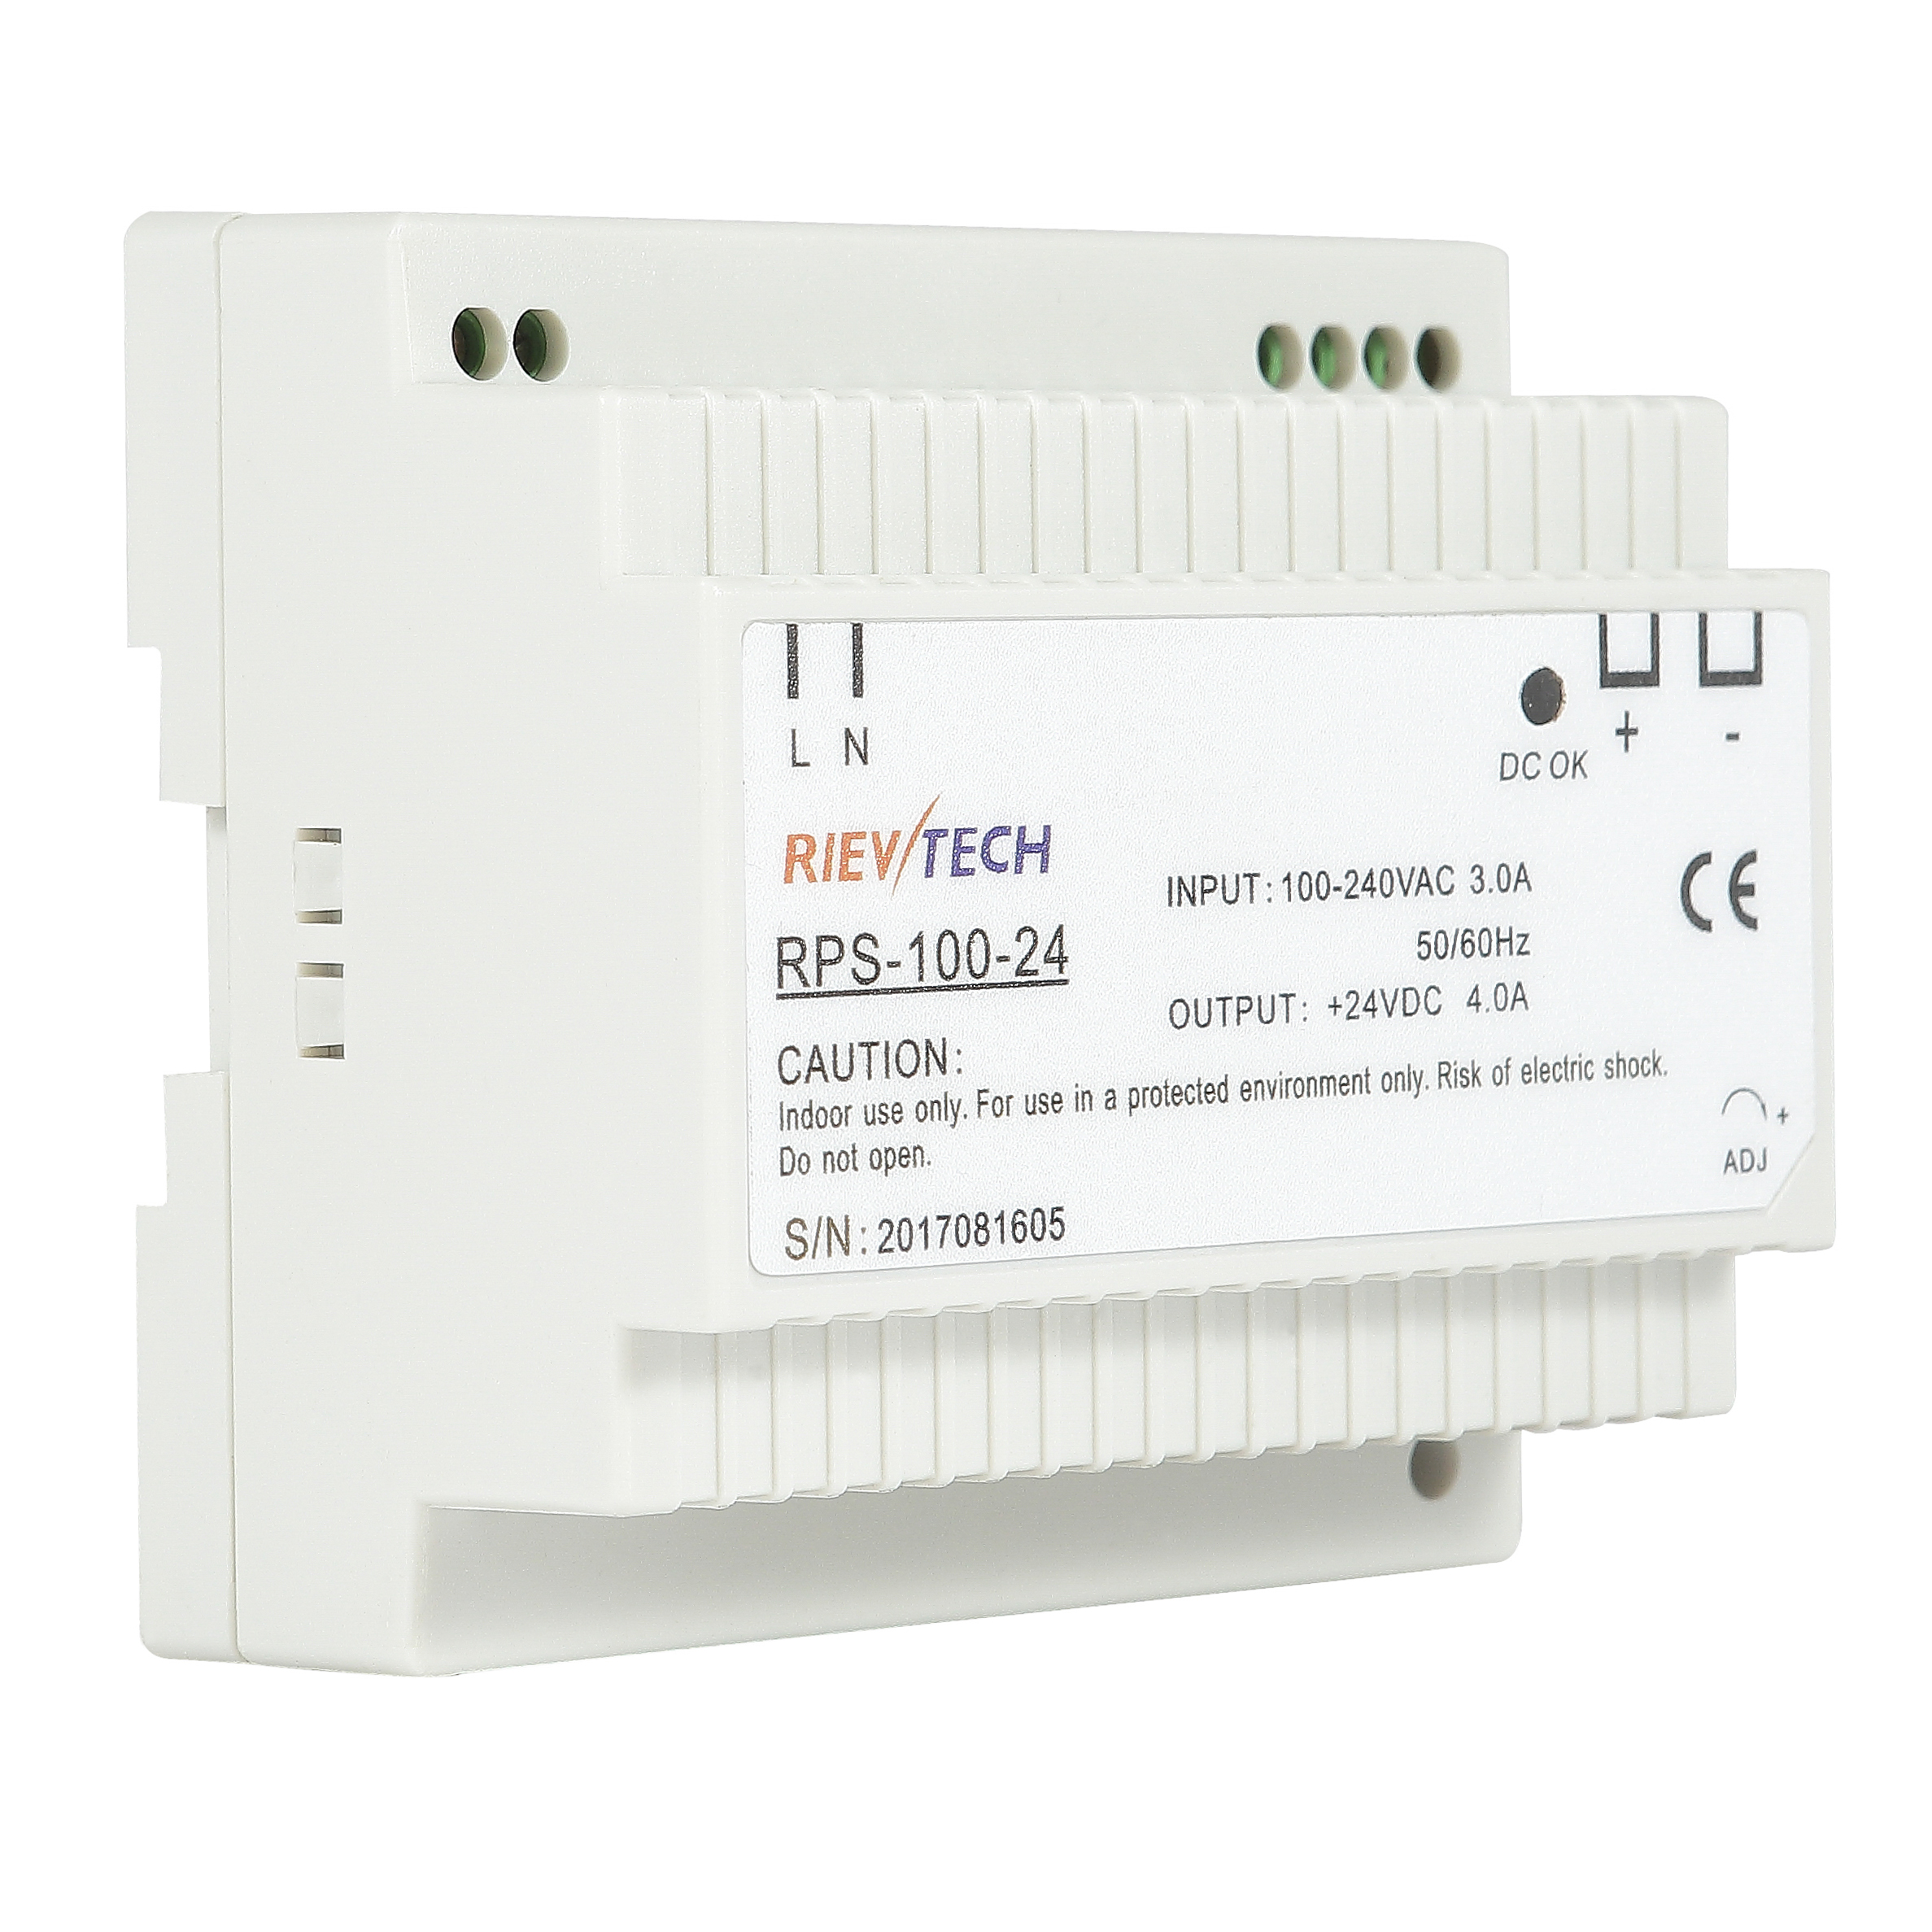 100W-DIN Rail switching power supply RPS-100 series